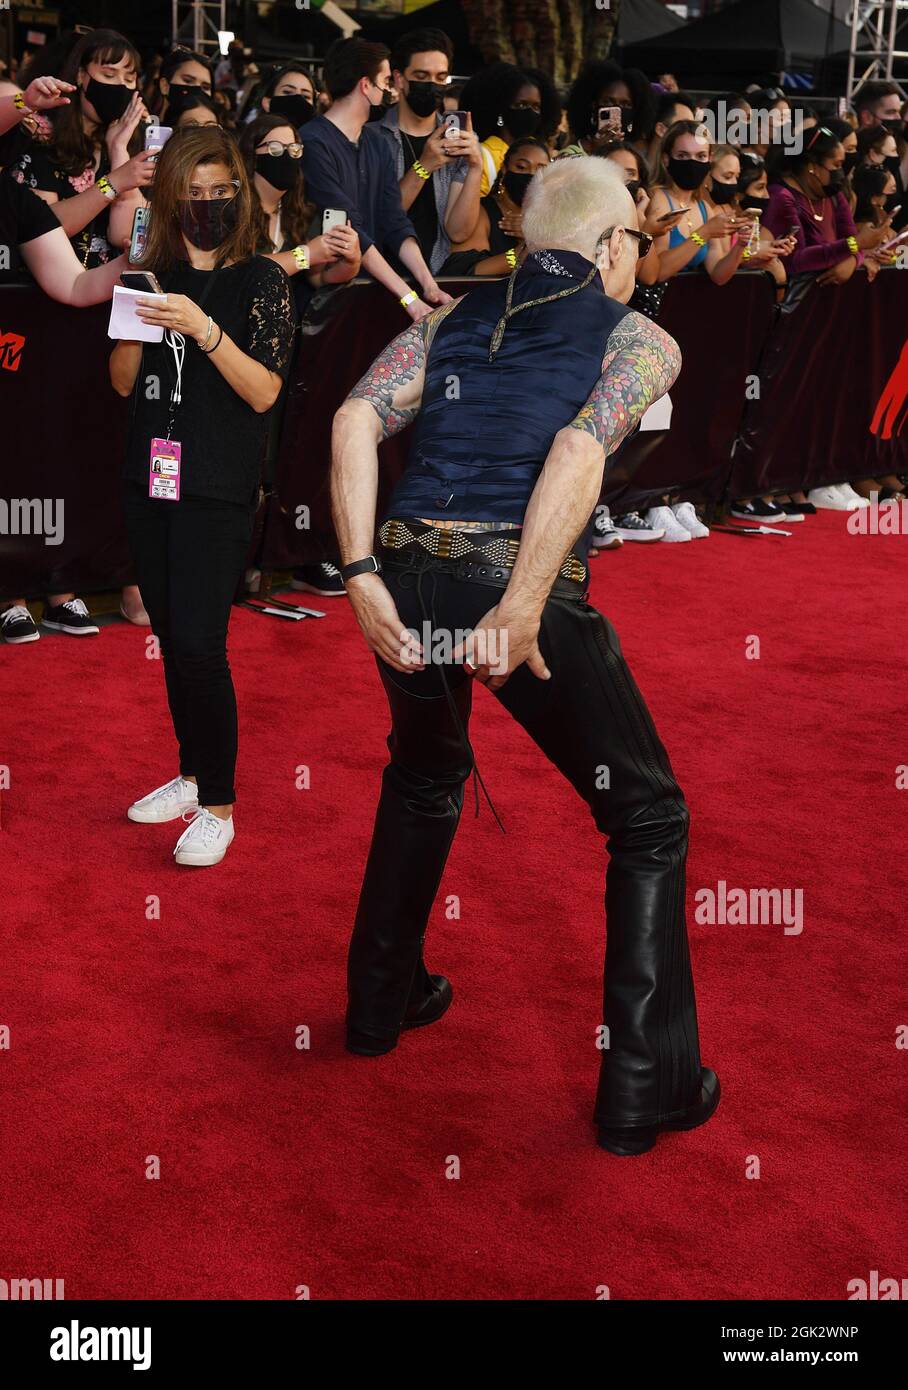 David Lee Roth attends the 2021 MTV Video Music Awards at Barclays Center on September 12, 2021 in the Brooklyn borough of New York City. Photo: Jeremy Smith/imageSPACE Stock Photo